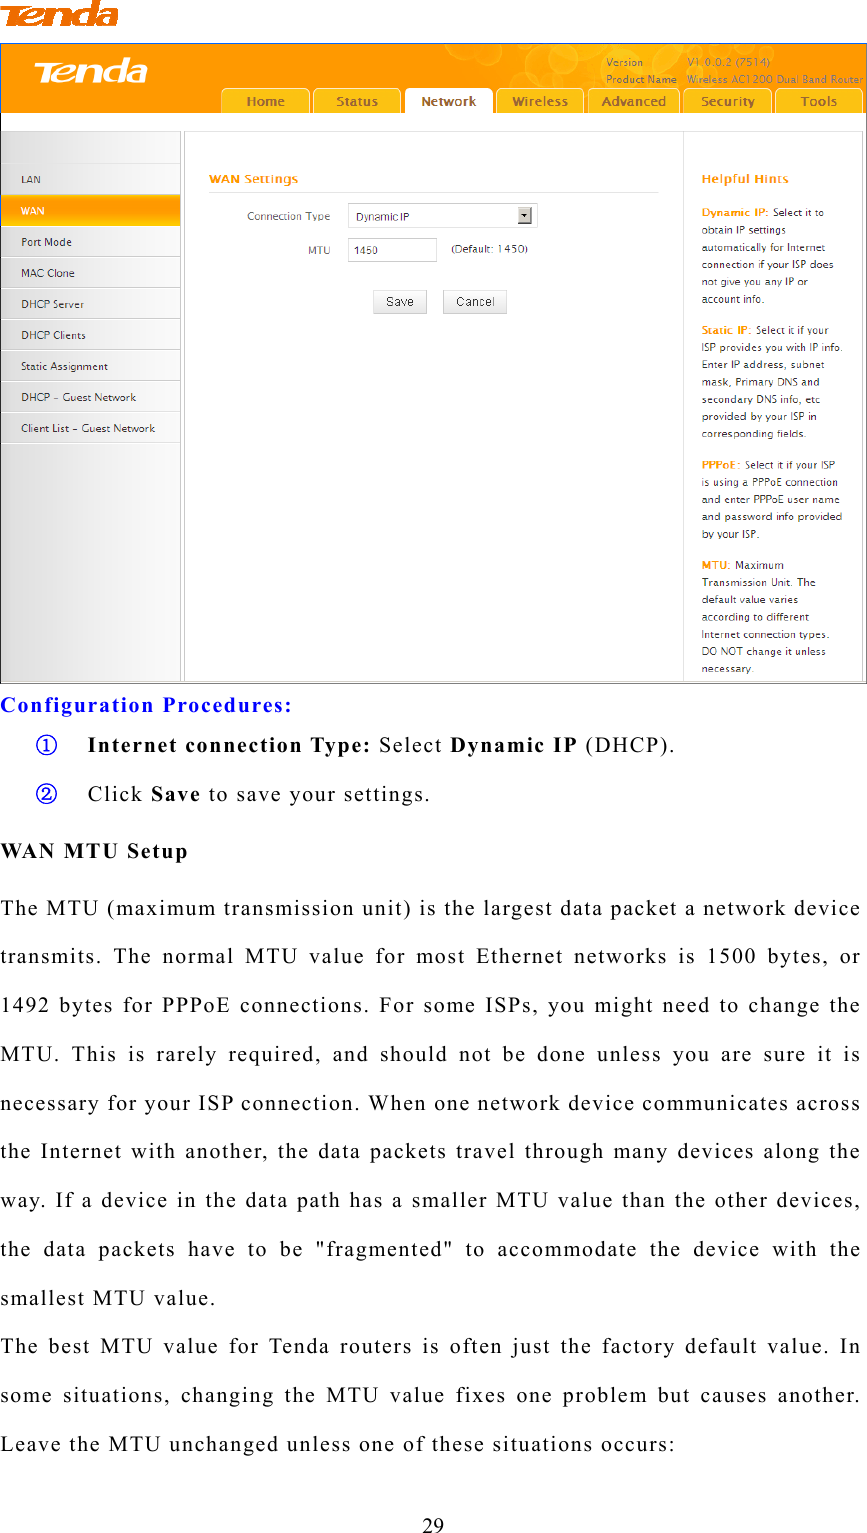                                 29  Configuration Procedures: ① Internet connection Type: Select Dynamic IP (DHCP). ② Click Save to save your settings. WAN MTU Setup The MTU (maximum transmission unit) is the largest data packet a network device transmits. The normal MTU value for most Ethernet networks is 1500 bytes, or 1492 bytes for PPPoE connections. For some ISPs, you might need to change the MTU. This is rarely required, and should not be done unless you are sure it is necessary for your ISP connection. When one network device communicates across the Internet with another, the data packets travel through many devices along the way. If a device in the data path has a smaller MTU value than the other devices, the data packets have to be &quot;fragmented&quot; to accommodate the device with the smallest MTU value. The best MTU value for Tenda routers is often just the factory default value. In some situations, changing the MTU value fixes one problem but causes another. Leave the MTU unchanged unless one of these situations occurs: 